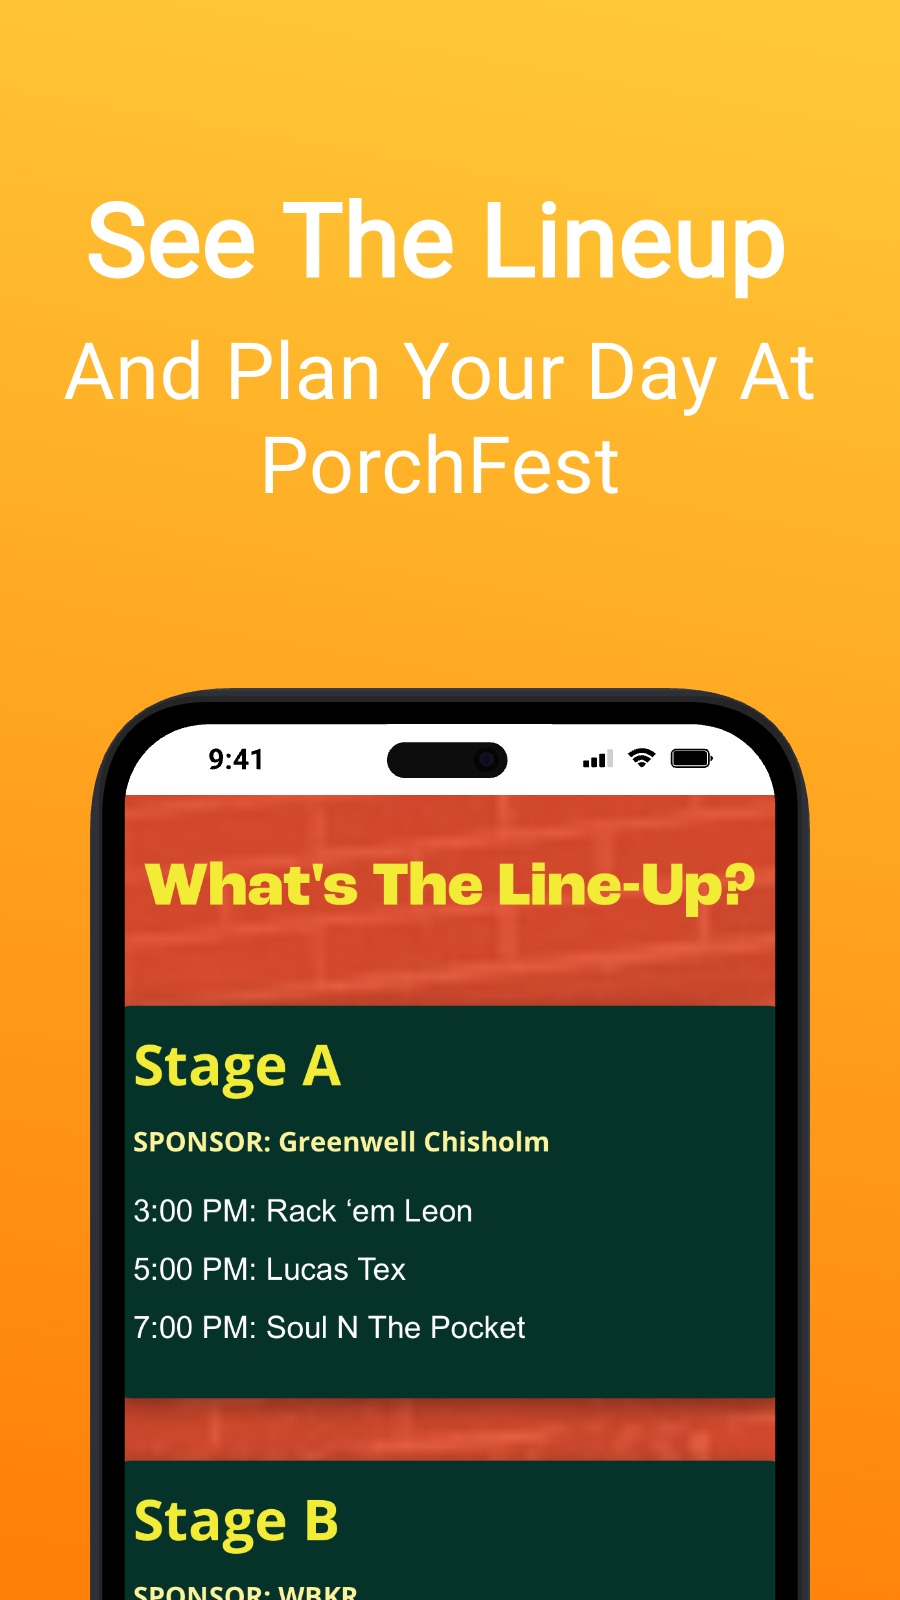 See The Lineup - And Plan Your Day At PorchFest